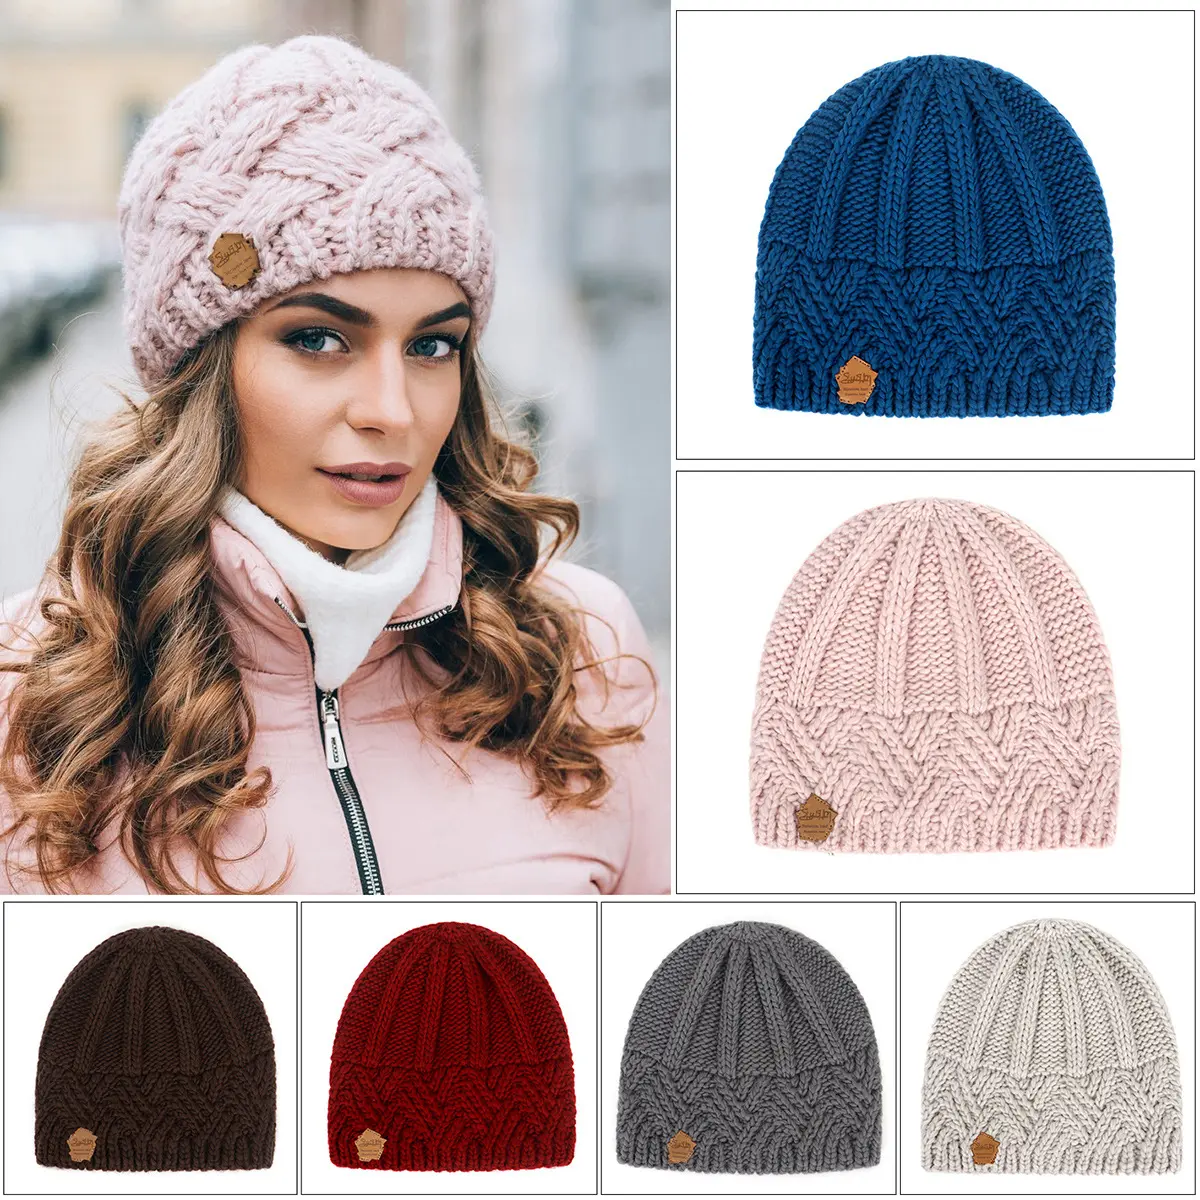 Custom manufacturers produce high quality knit hats lovely casual knit hats